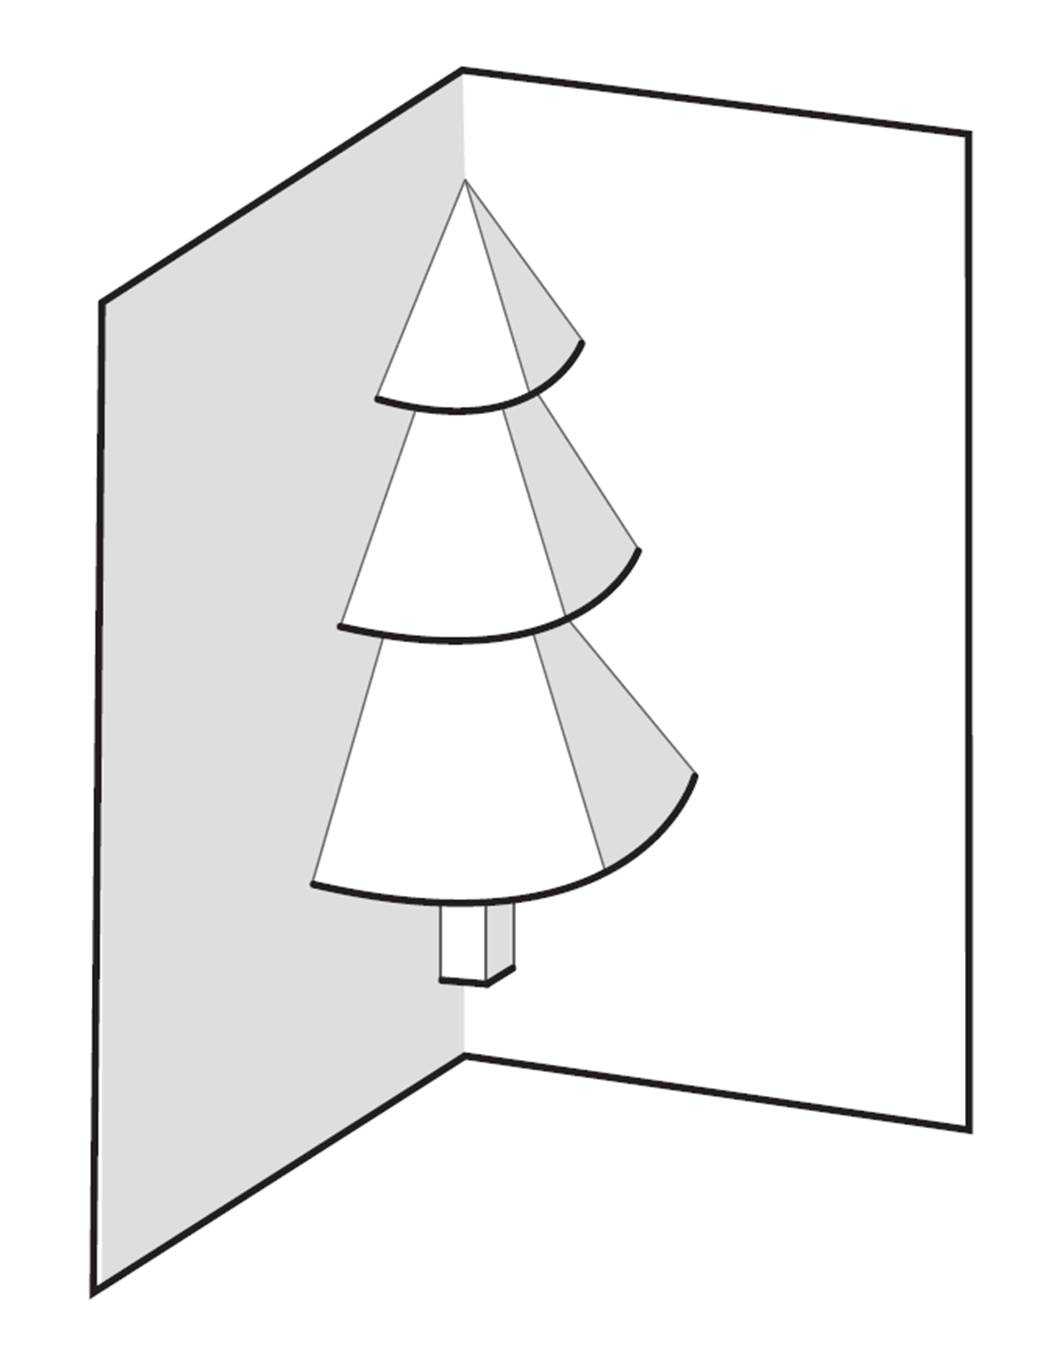 How To Make A Pop Up Christmas Tree Card: 6 Steps Intended For Pop Up Tree Card Template